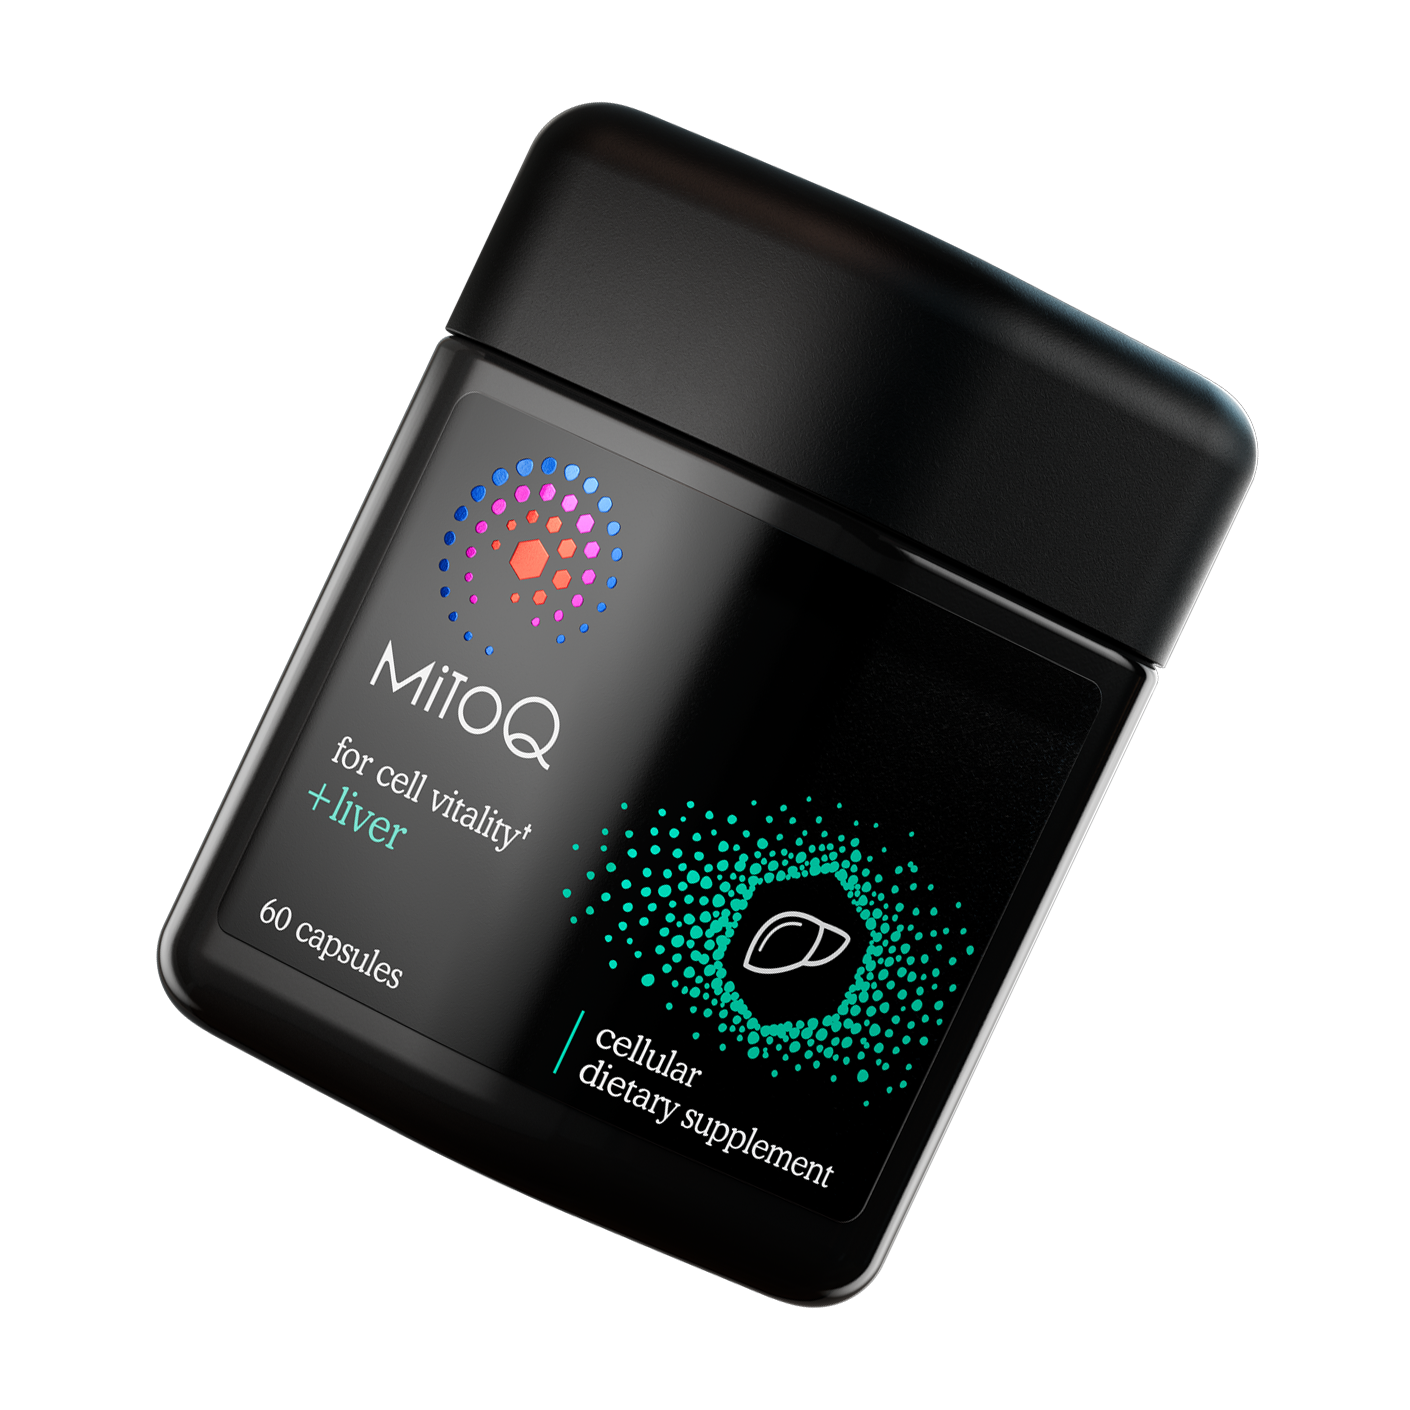 MitoQ +liver product image tilted